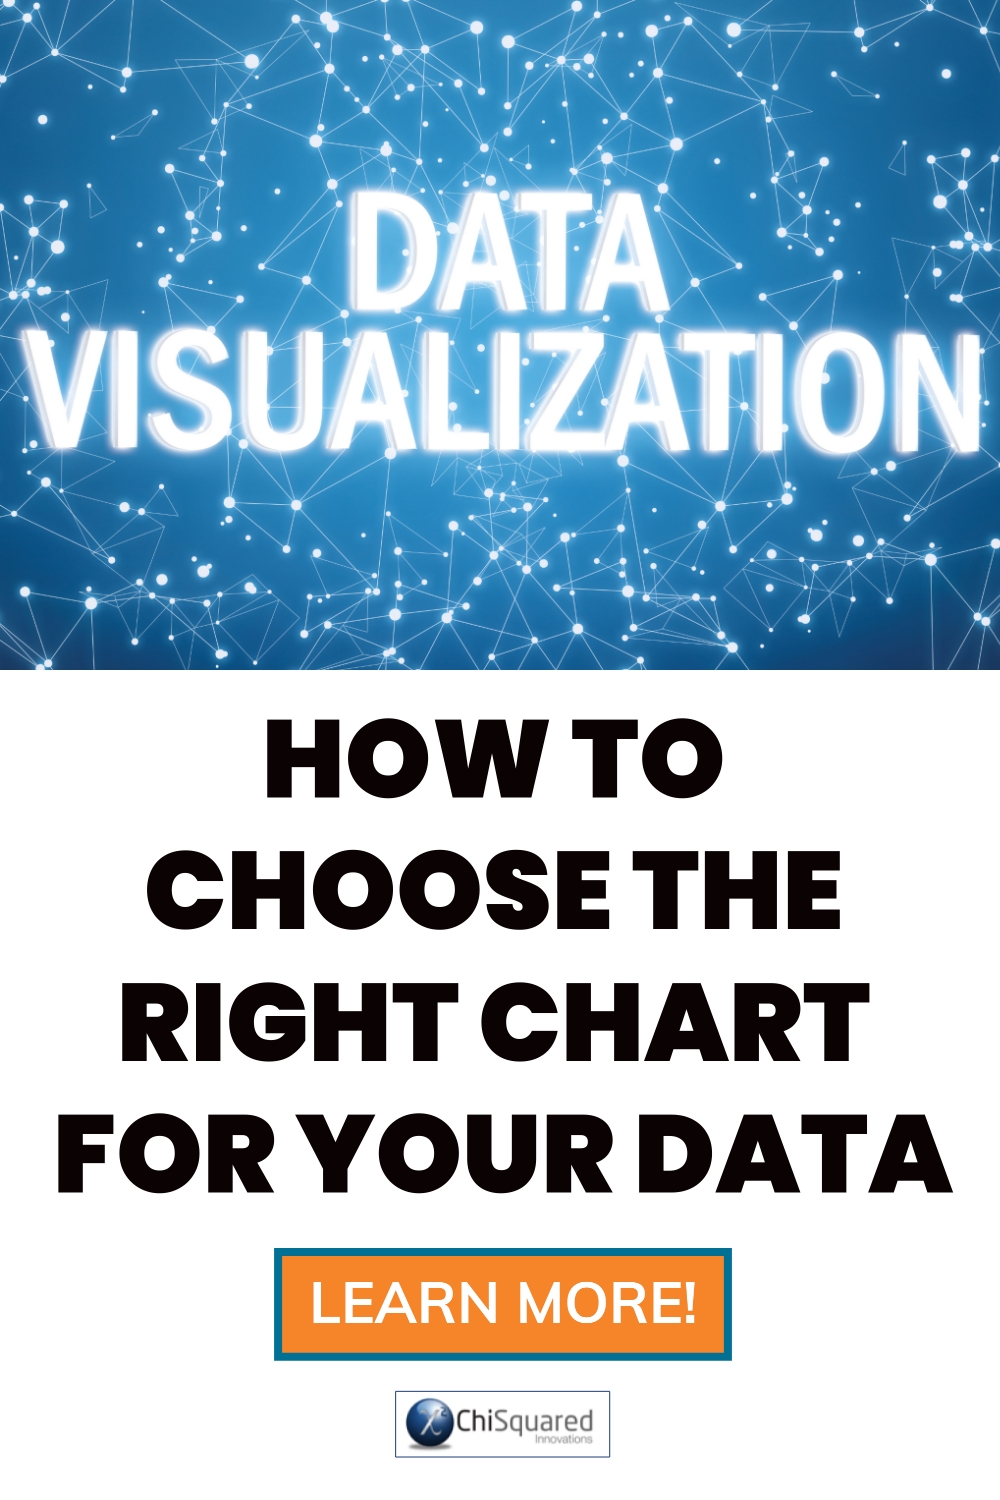 DataViz: How to choose the right chart for your data